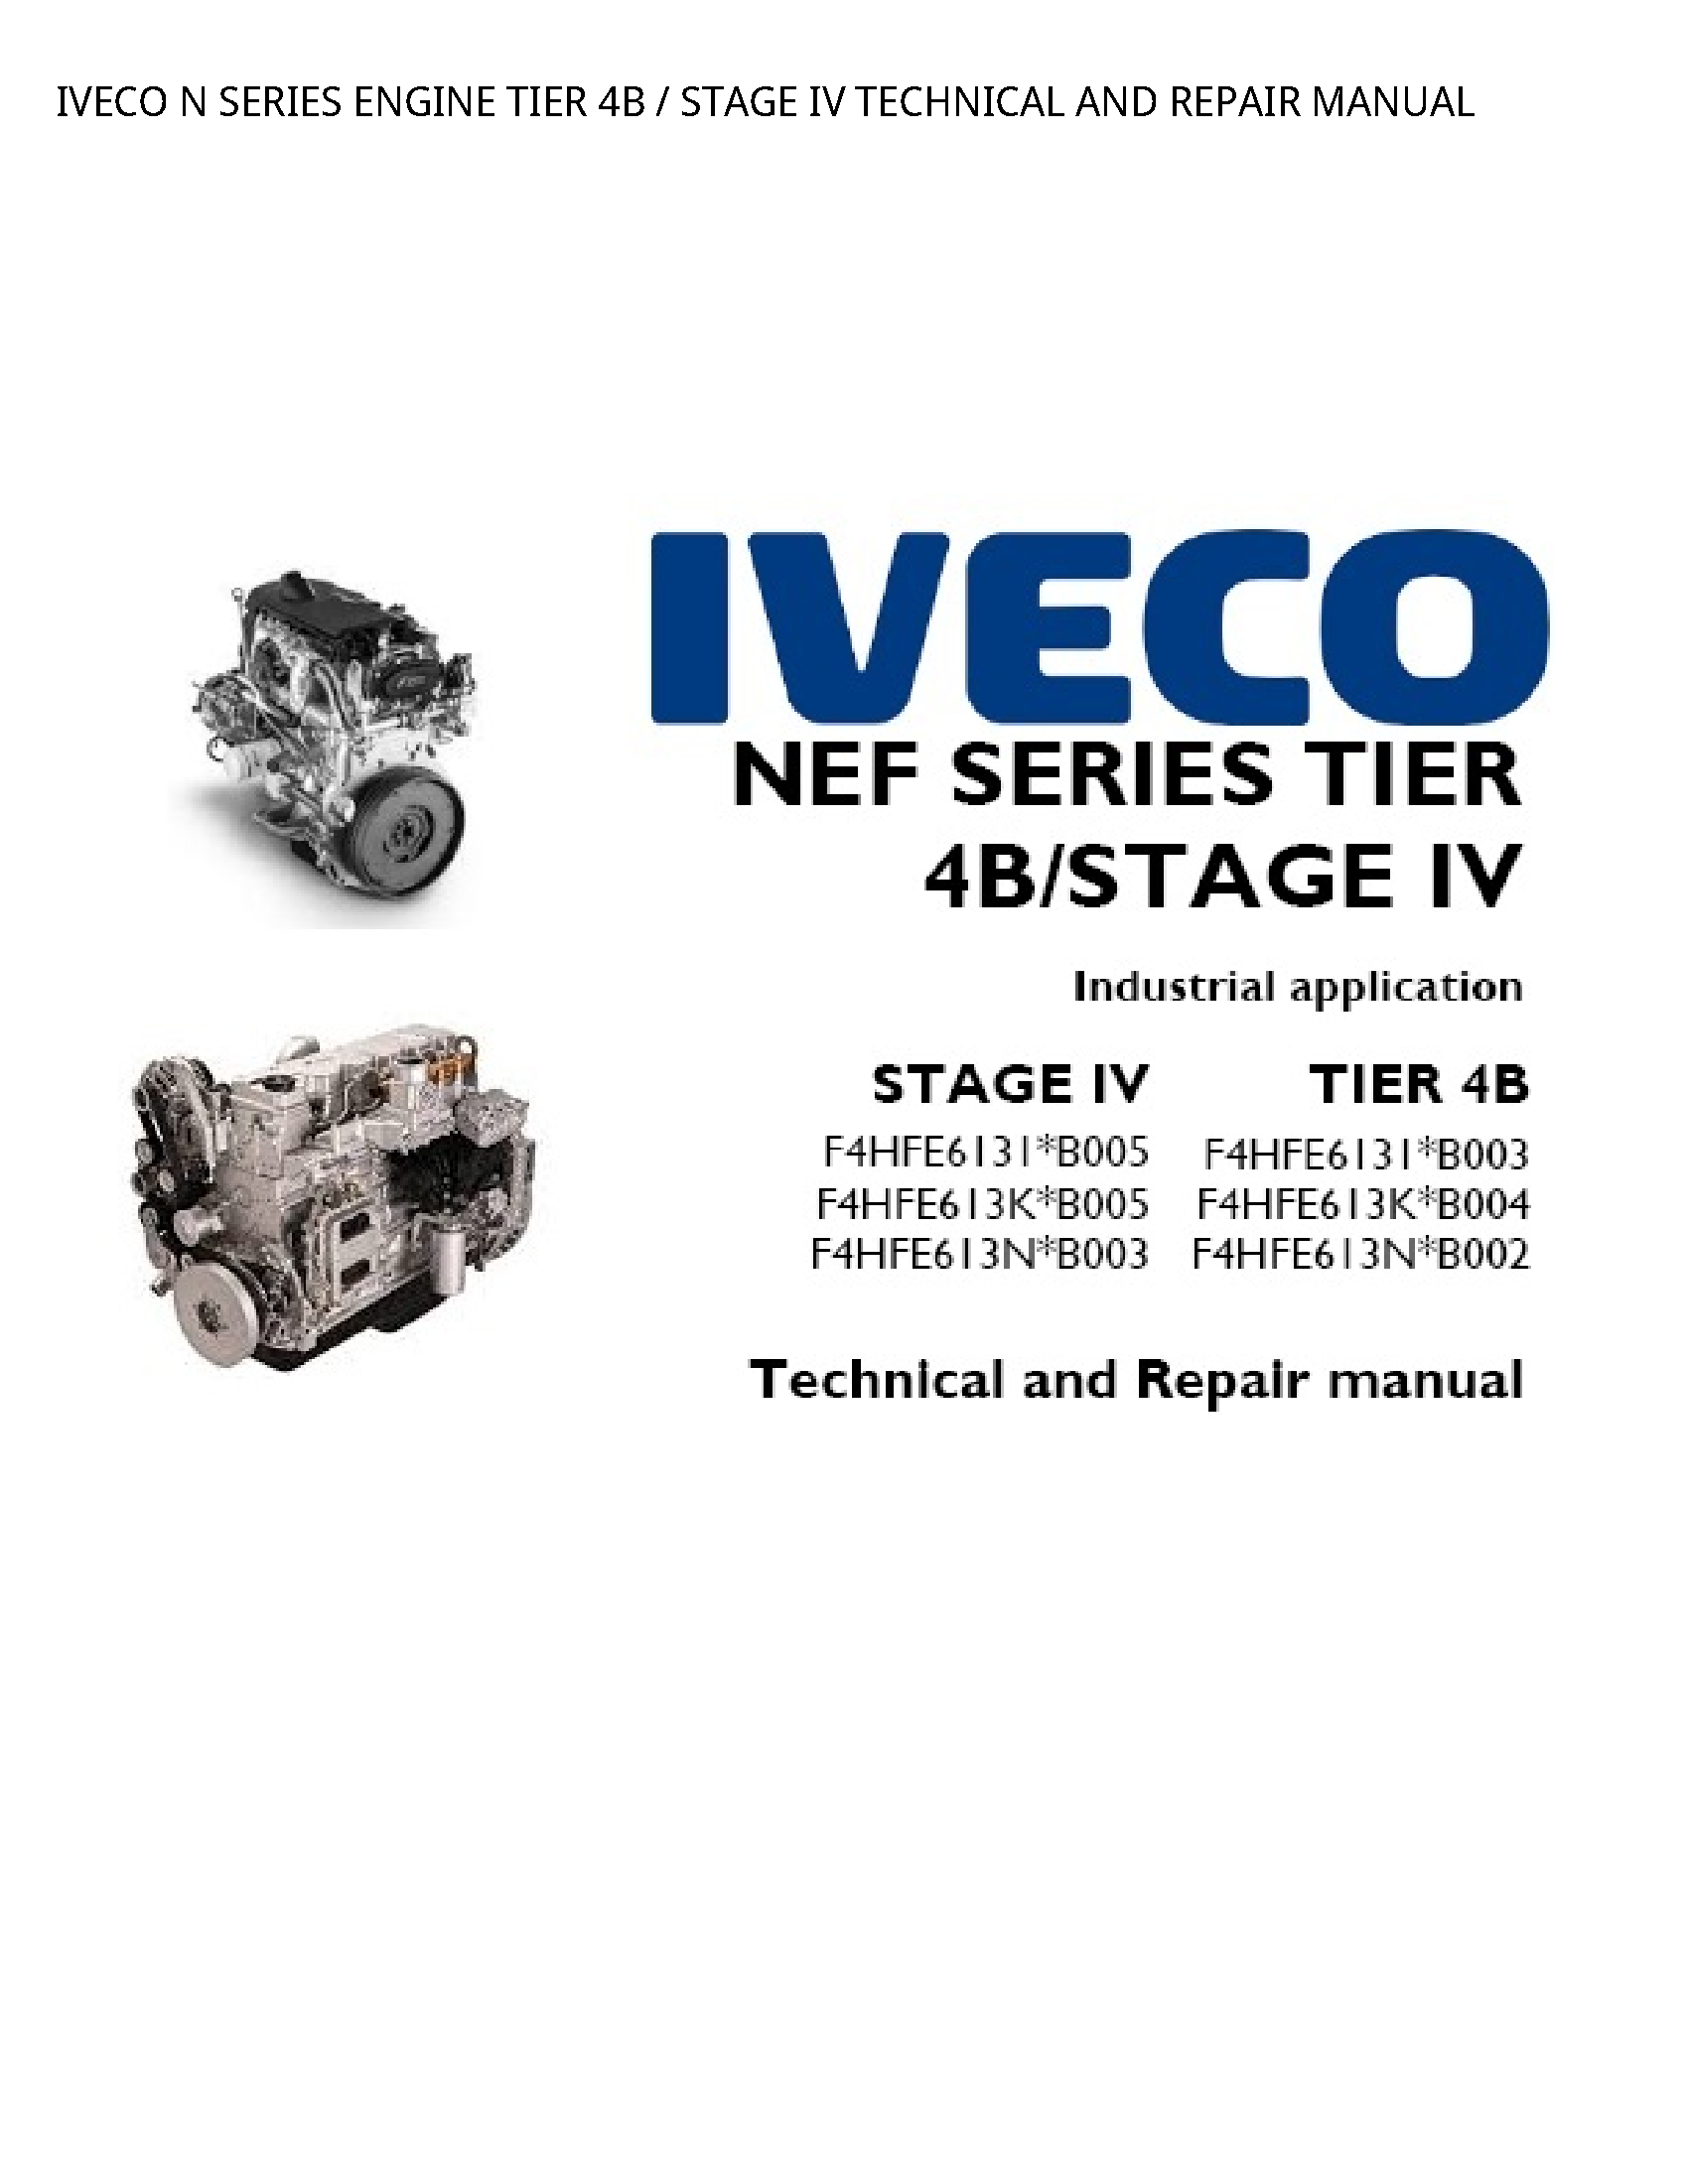 Iveco 4B SERIES ENGINE TIER STAGE IV TECHNICAL AND REPAIR manual